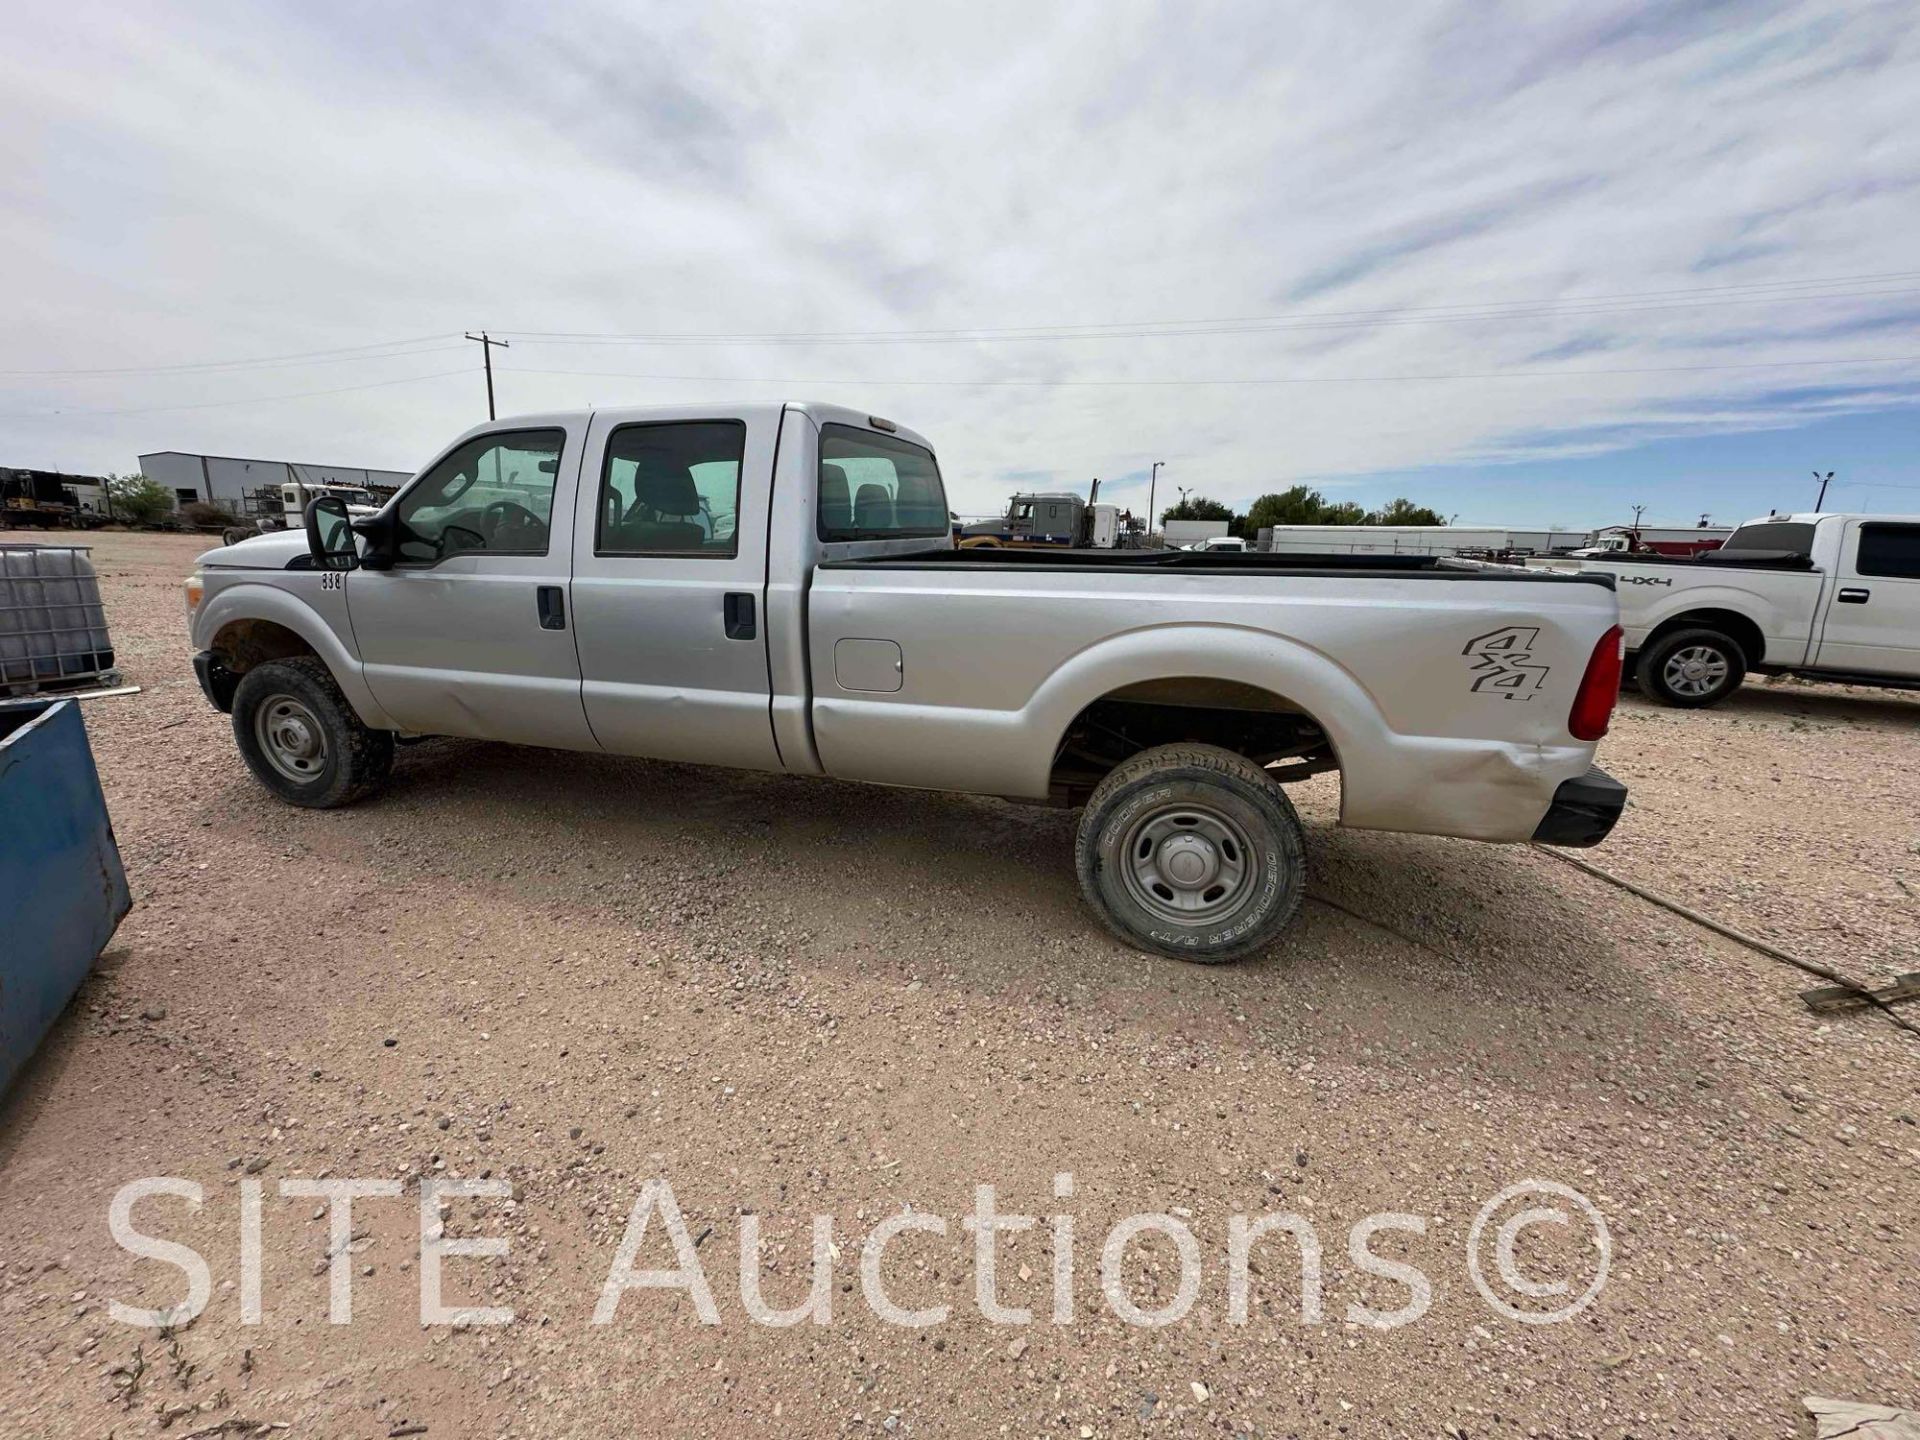 2011 Ford F350 SD Crew Cab Pickup Truck - Image 9 of 9